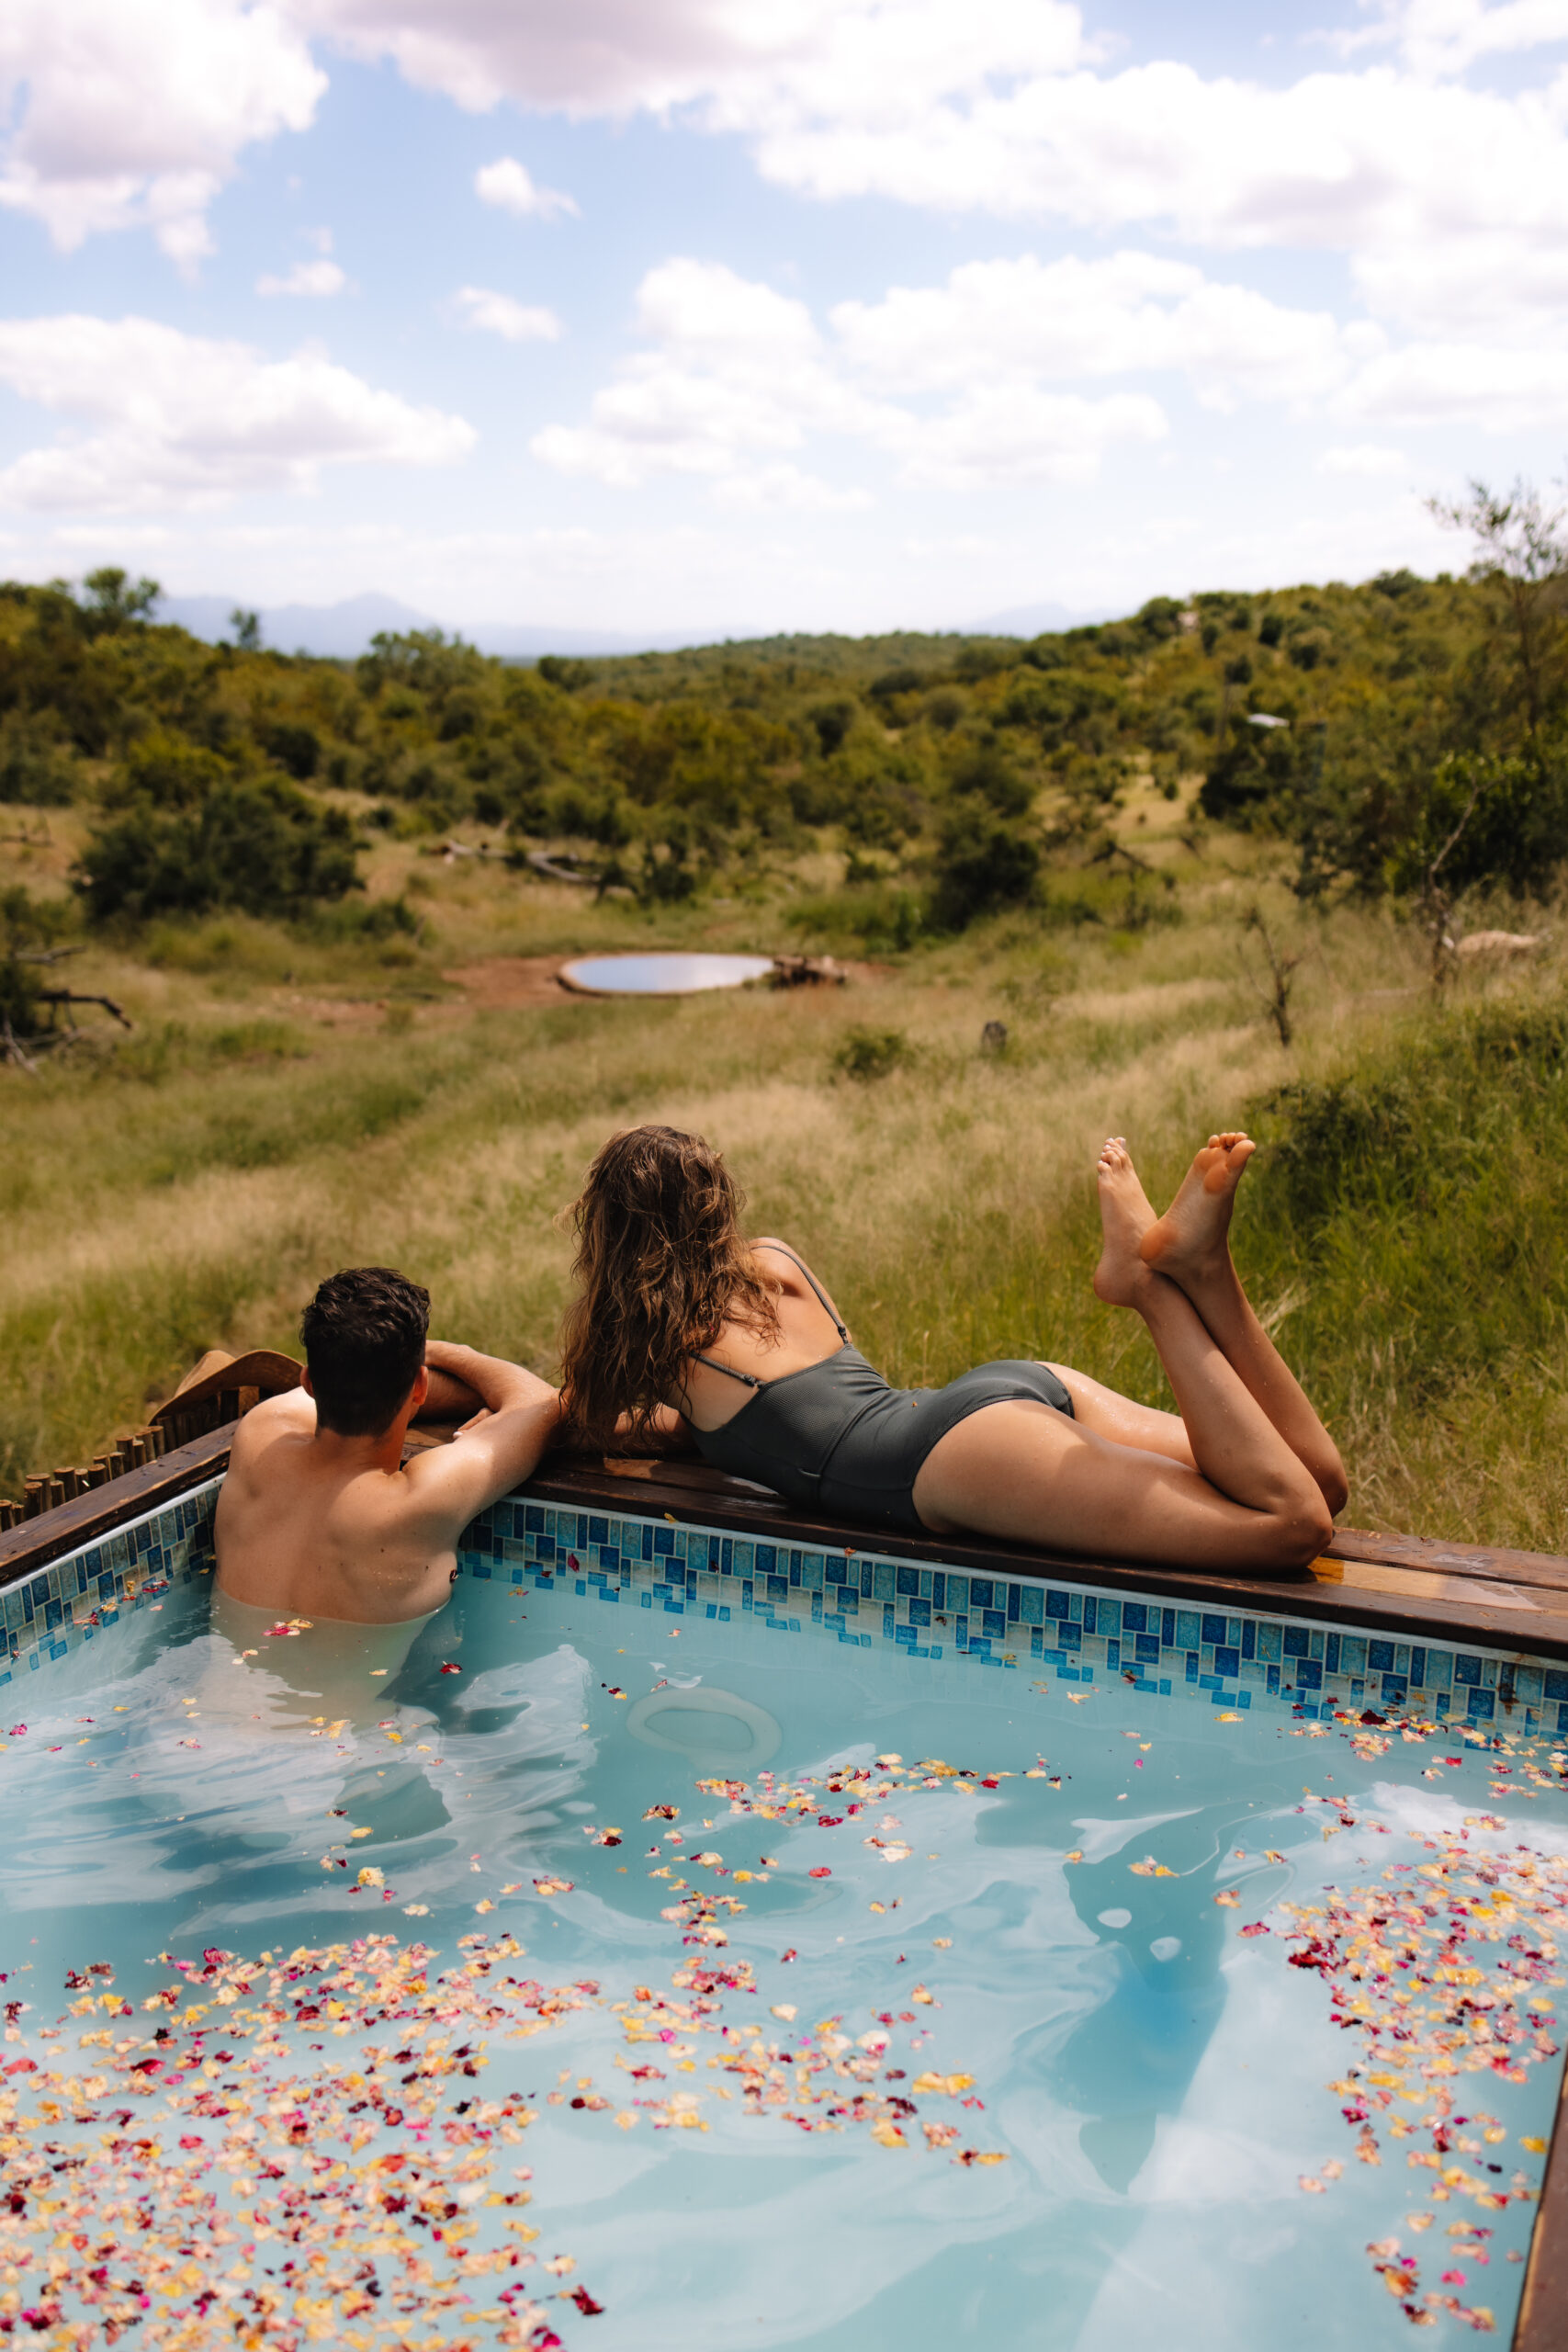 A honeymoon couple relaxing by a pool with flowers floating around them as they overlook the trees 